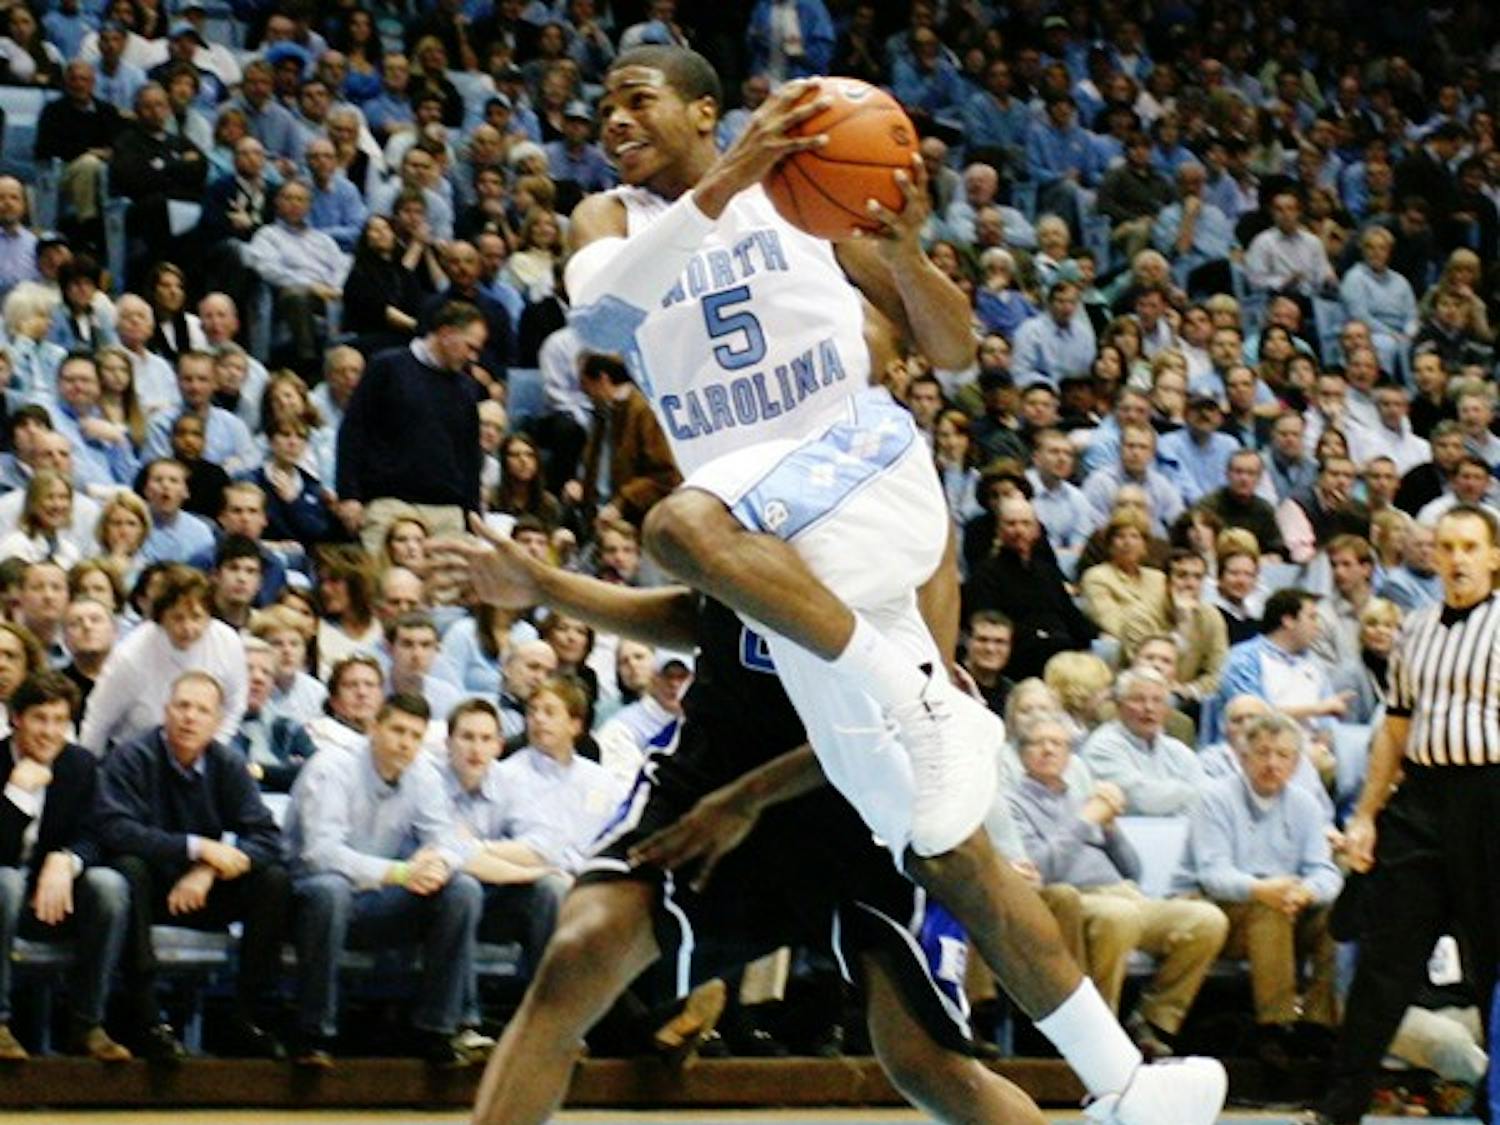 Dexter Strickland averages 5.6 points per game for UNC in his first season. DTH File/Phong Dinh